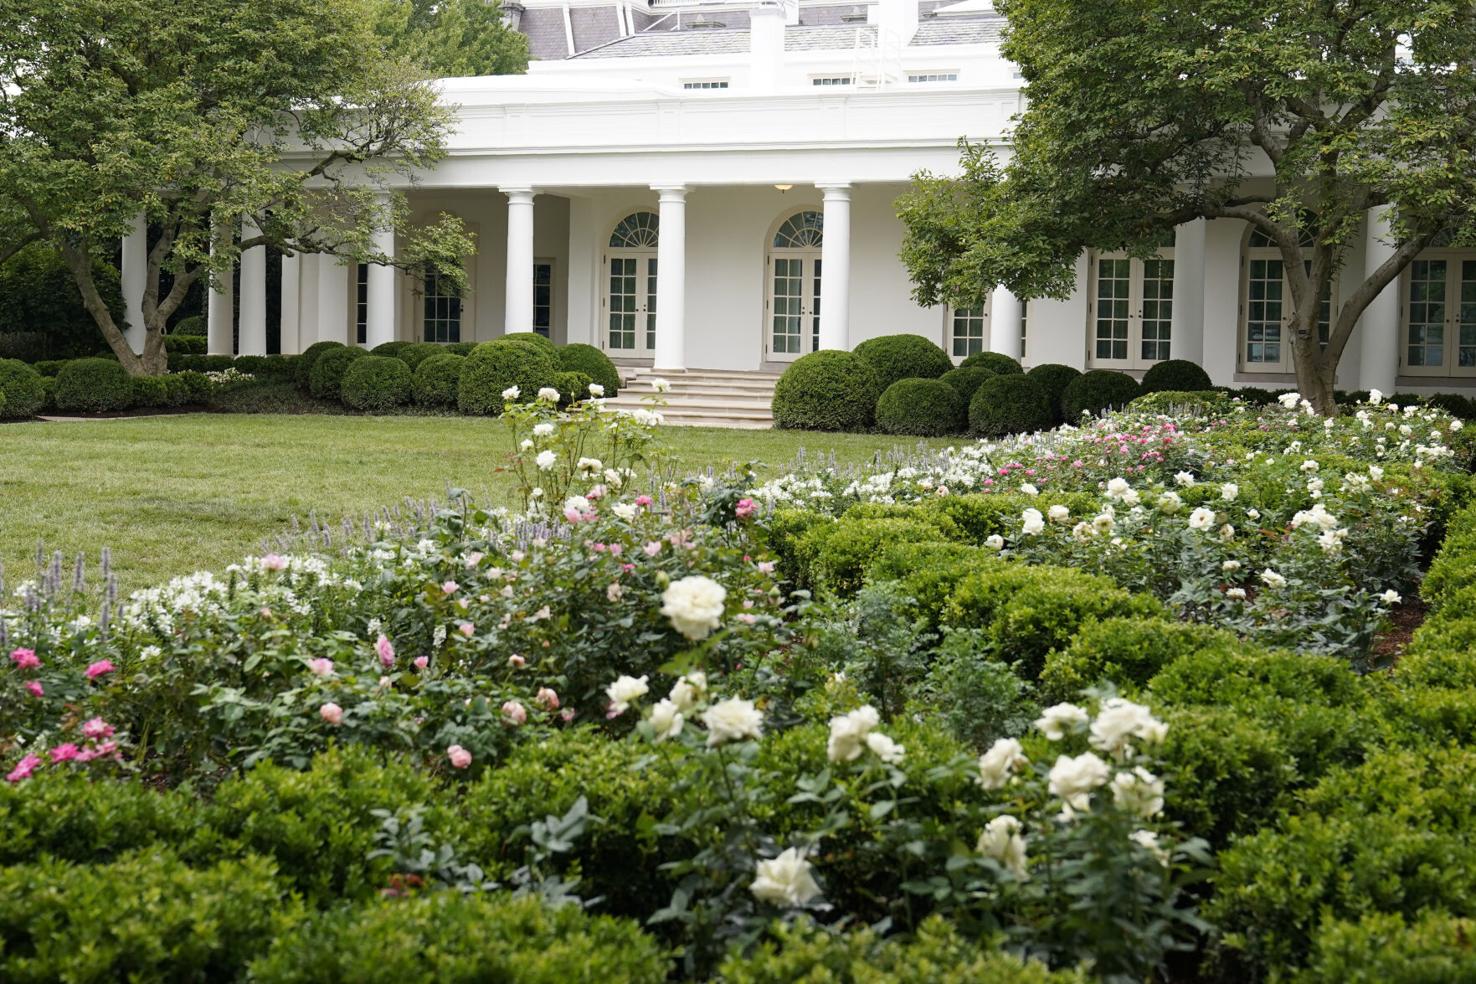 Photos An upclose look at the newly renovated White House Rose Garden